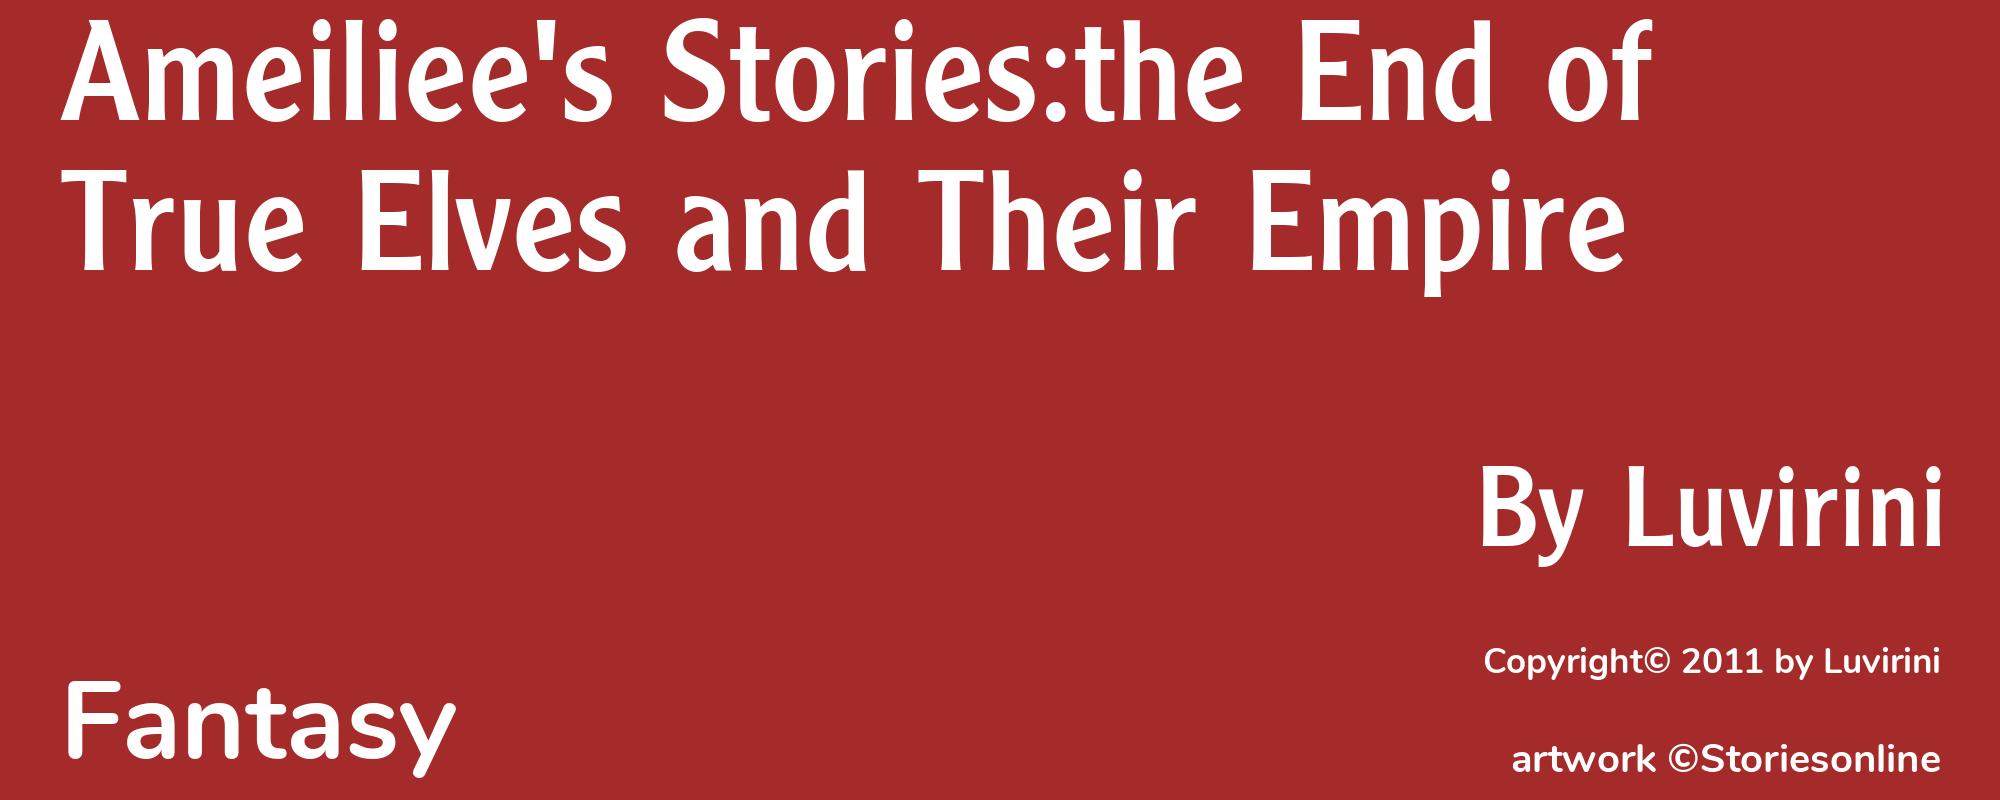 Ameiliee's Stories:the End of True Elves and Their Empire - Cover